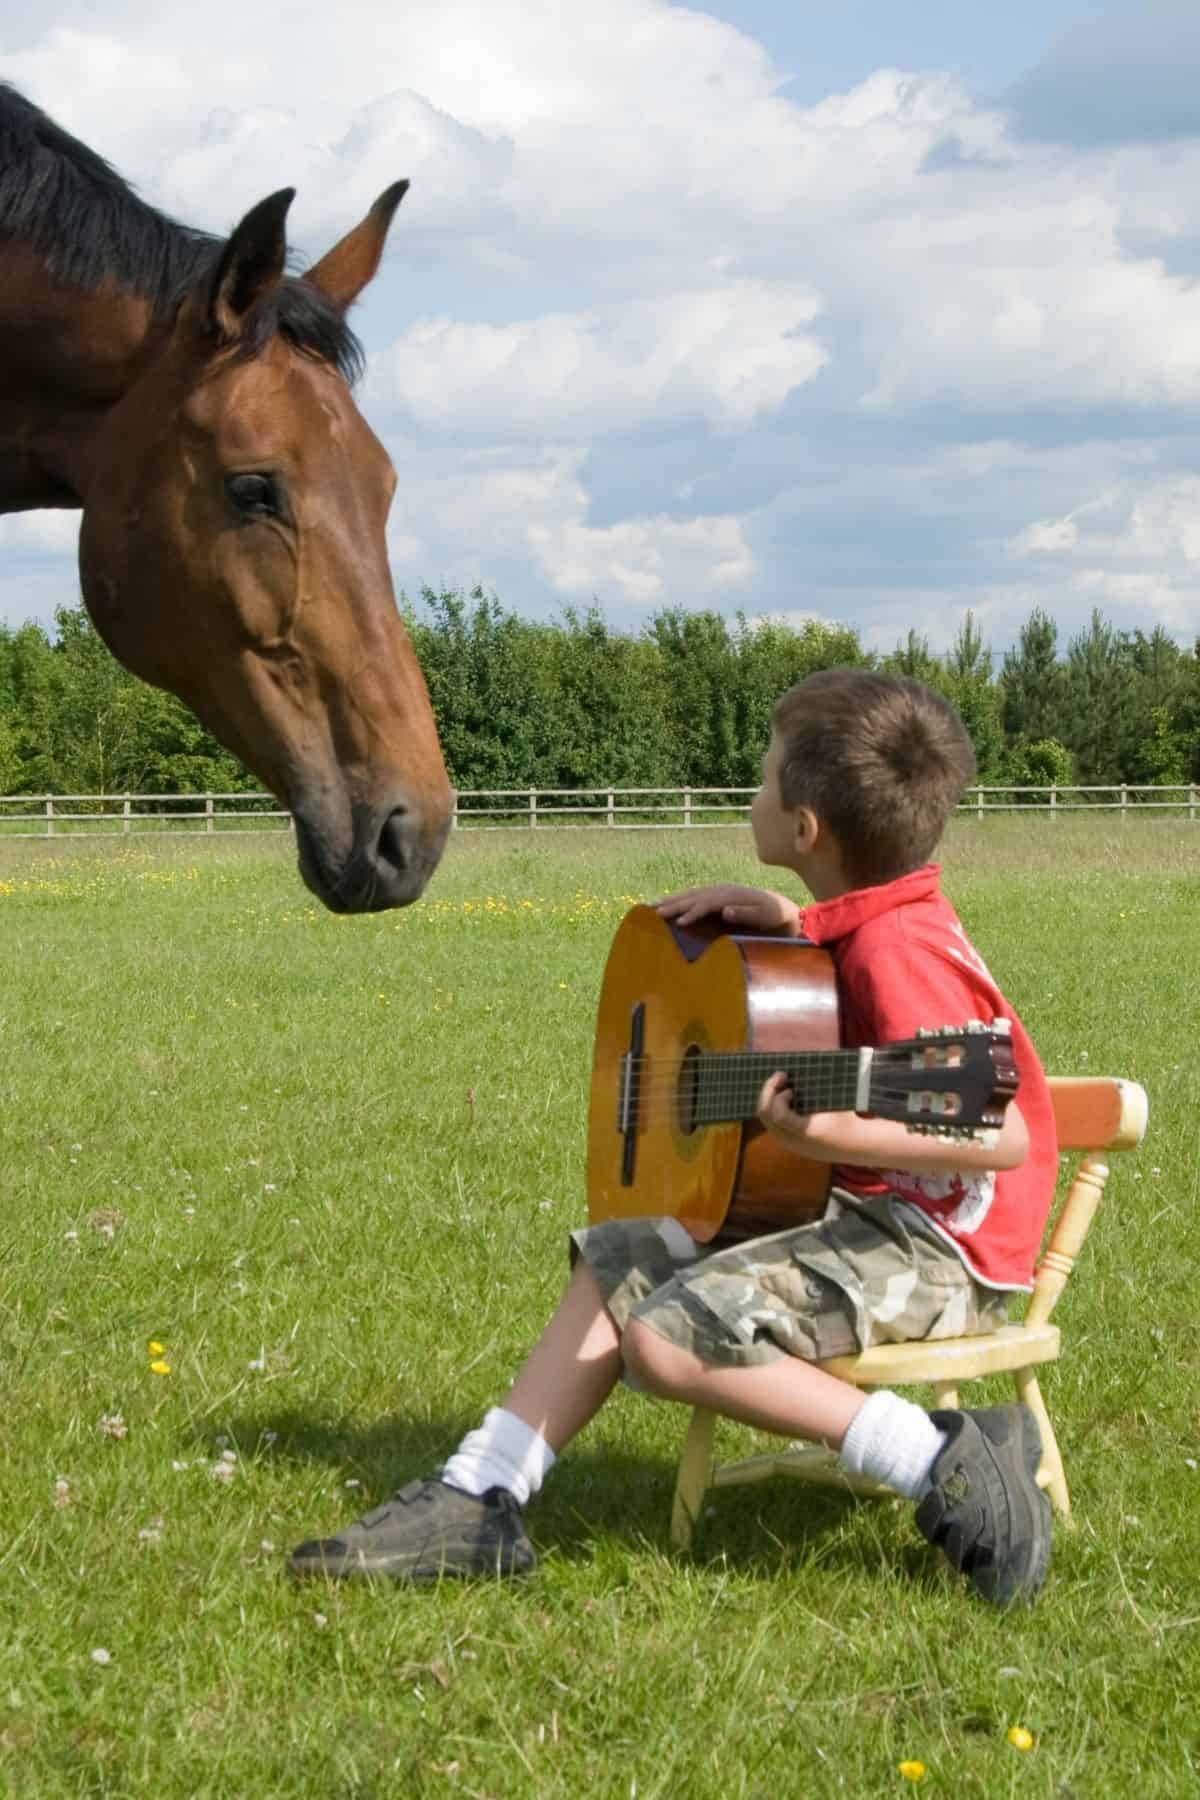 Little boy playing guitar in front of brown horse